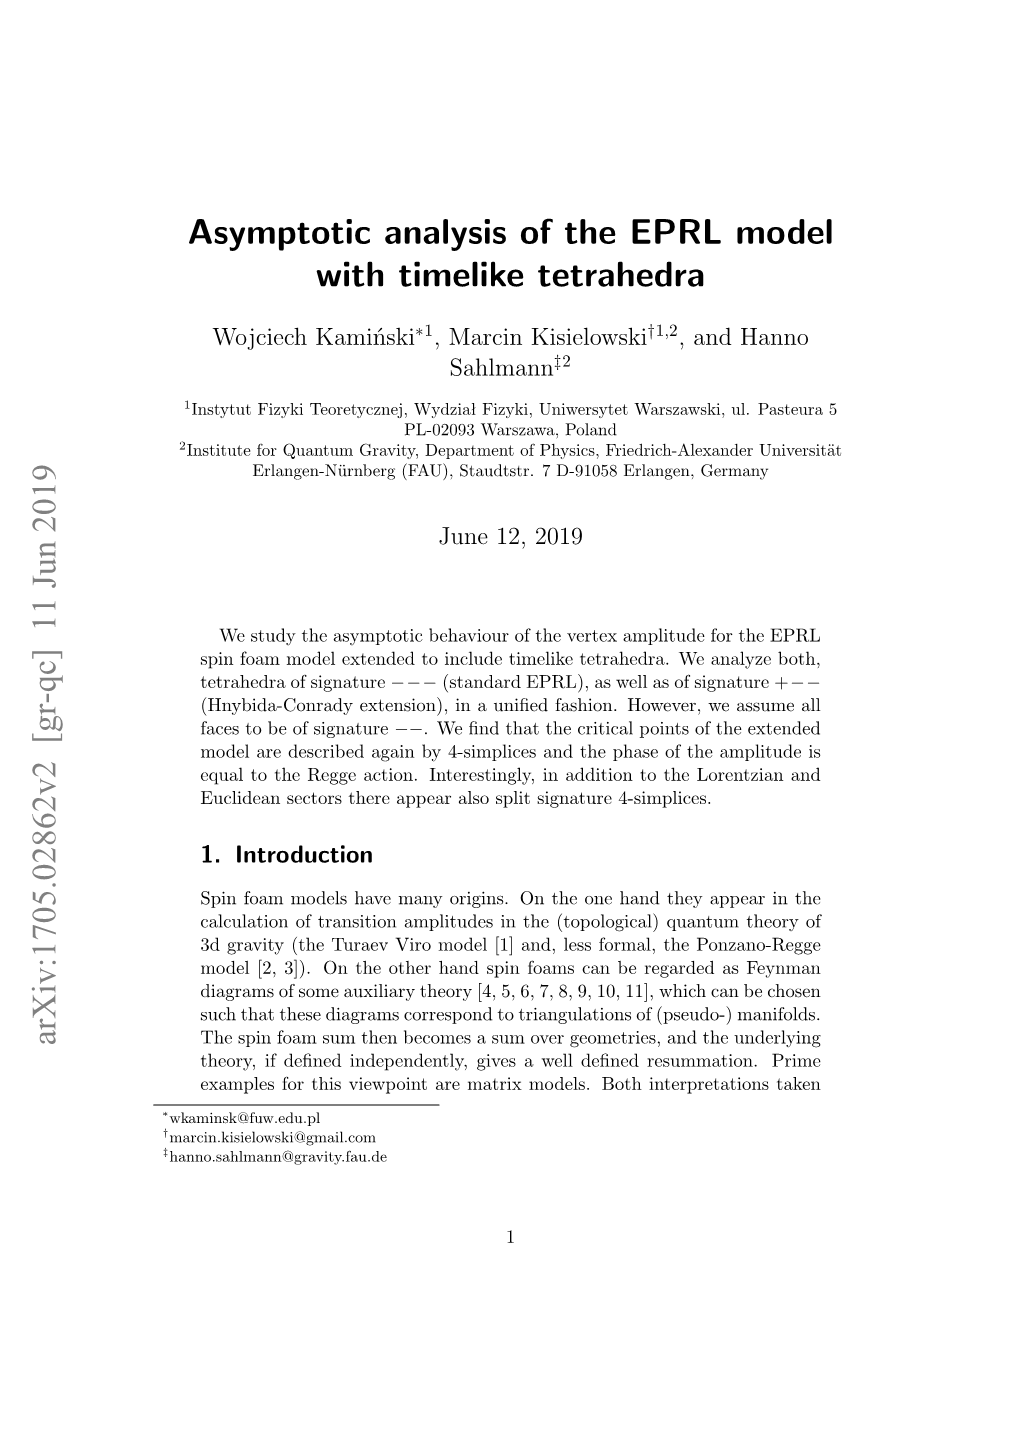 Asymptotic Analysis of the EPRL Model with Timelike Tetrahedra